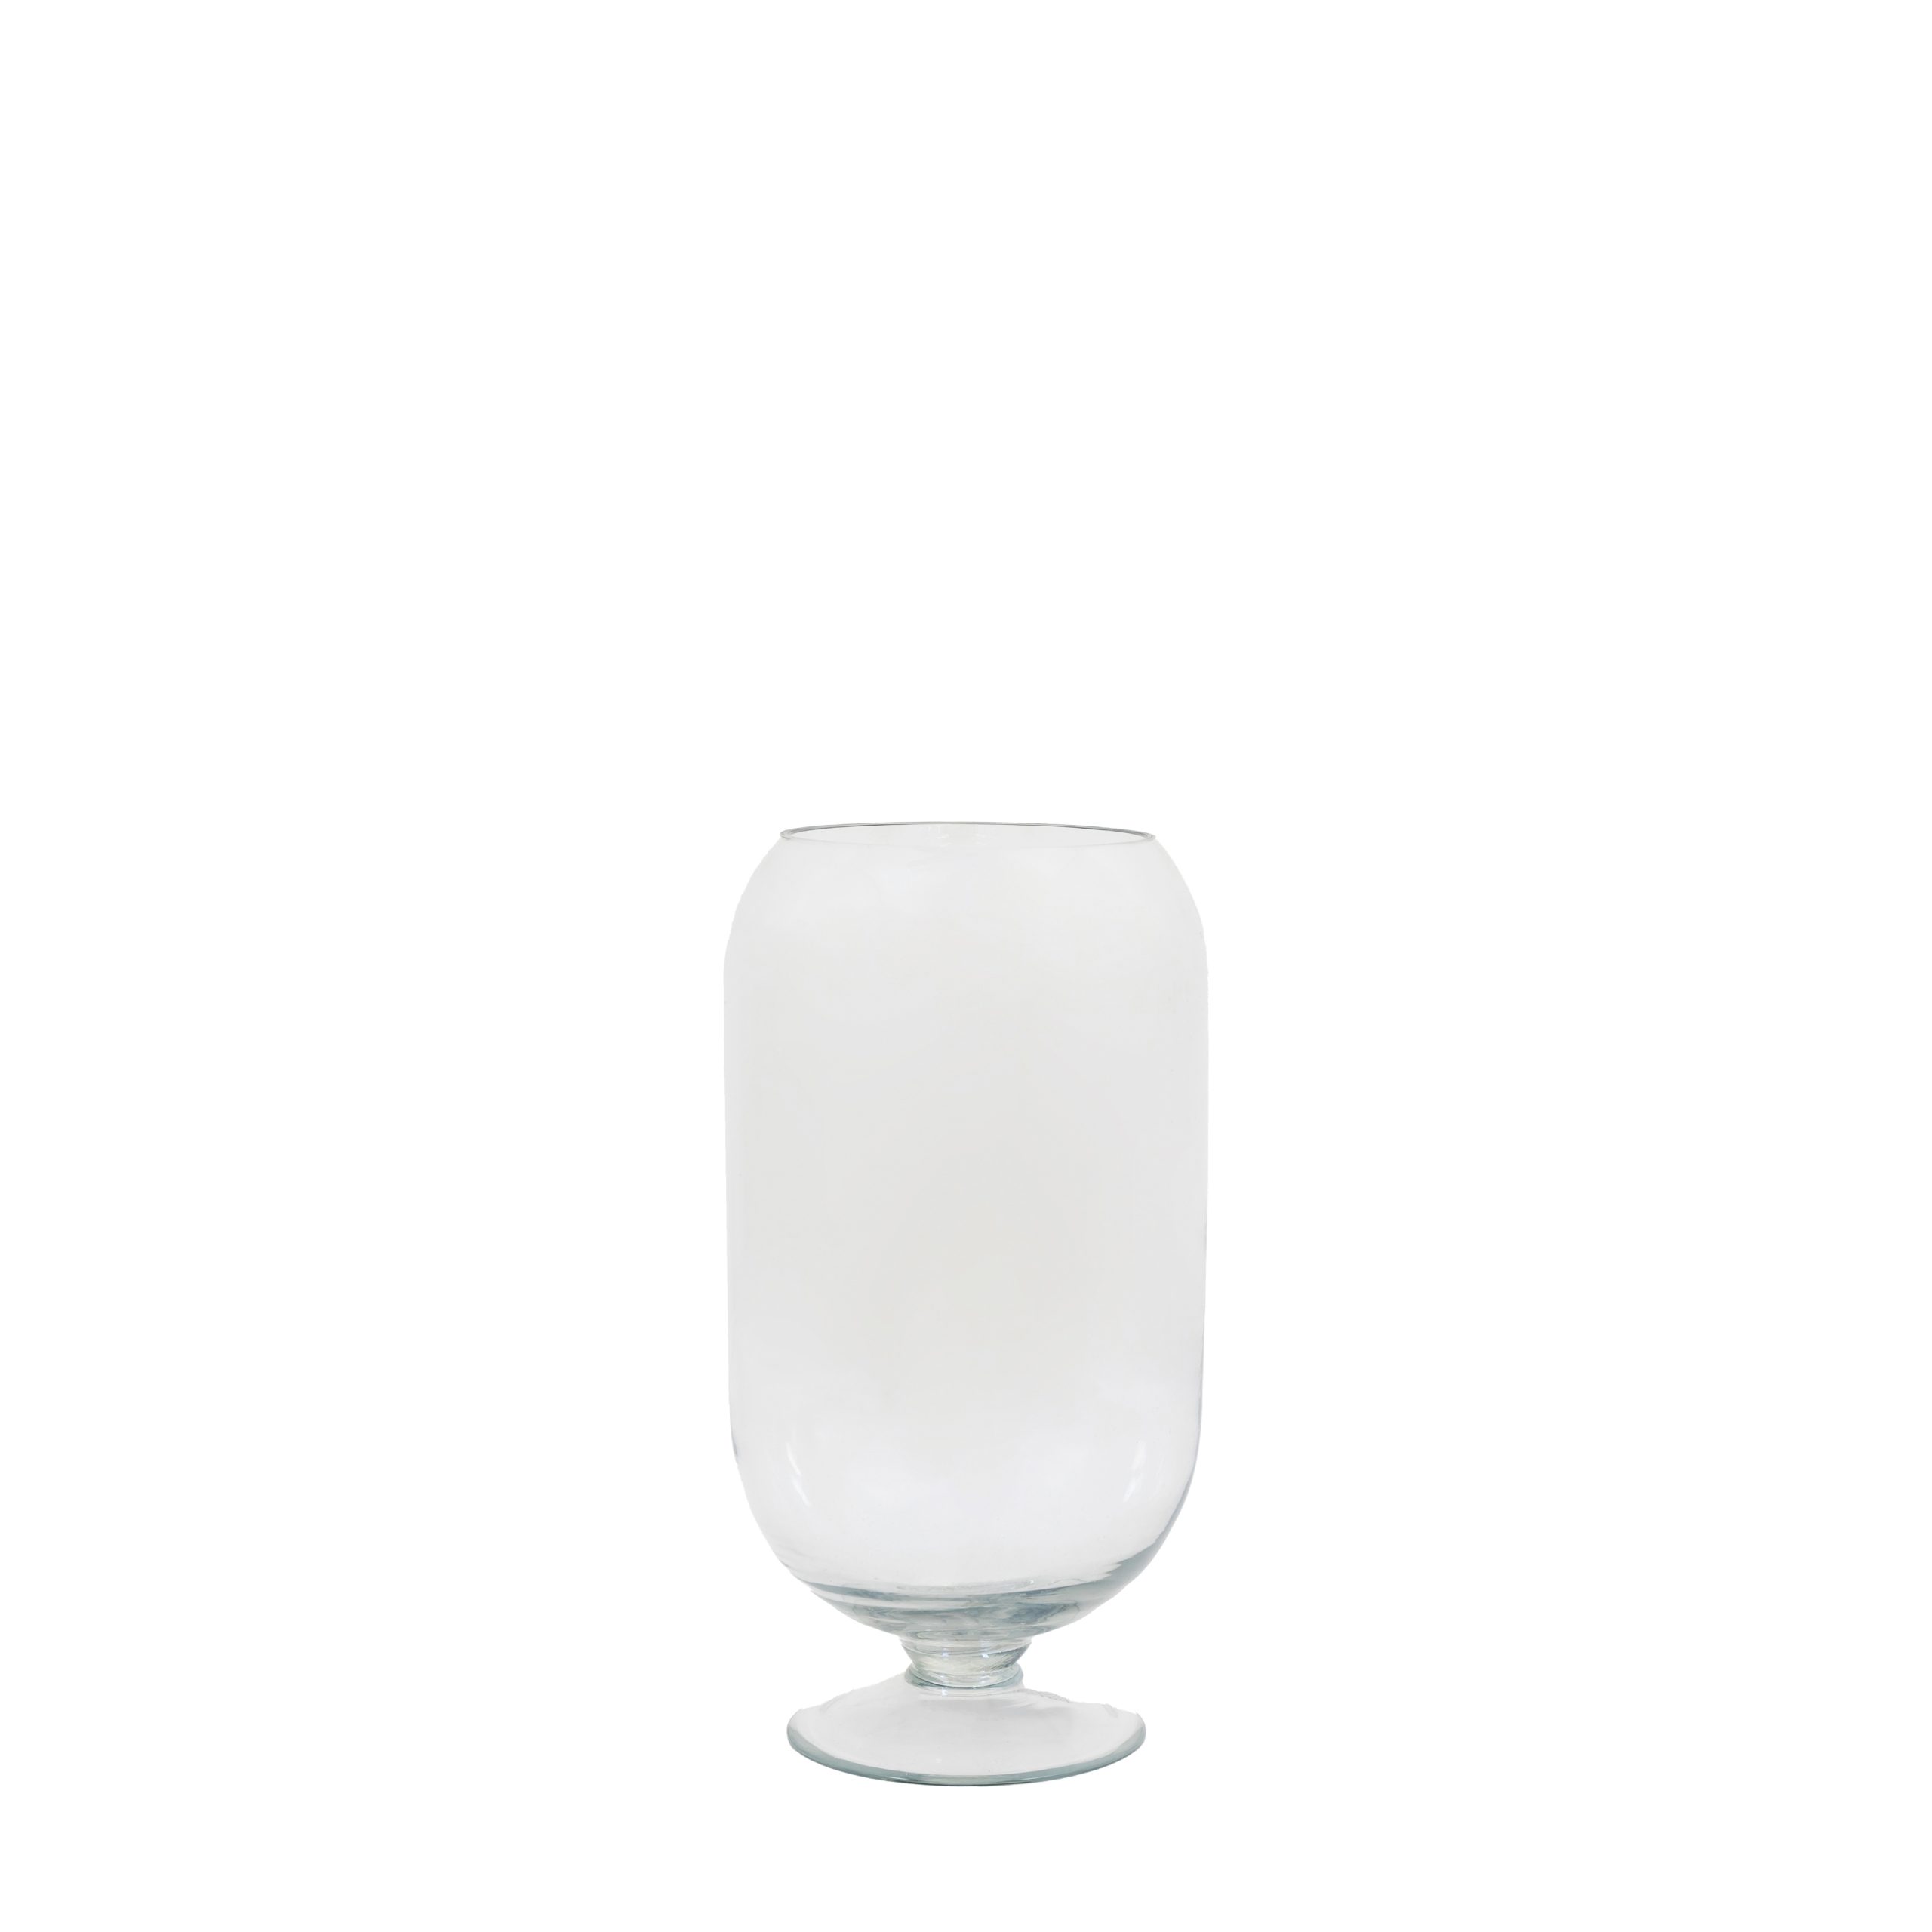 Gallery Direct Flynn Vase Small Clear